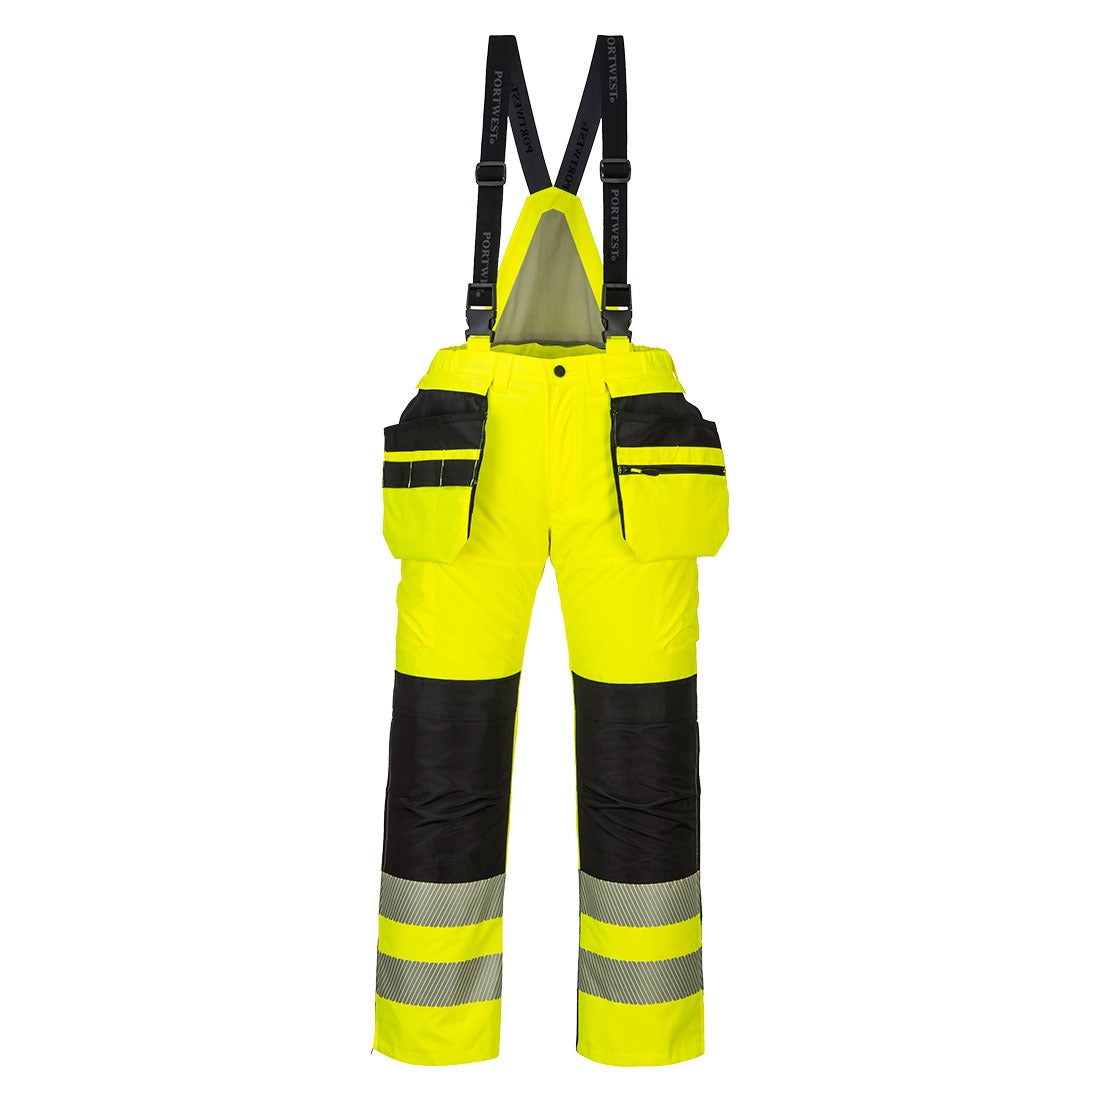 Firefighter Tools, Gear, & Accessories | Shop – Fire-End